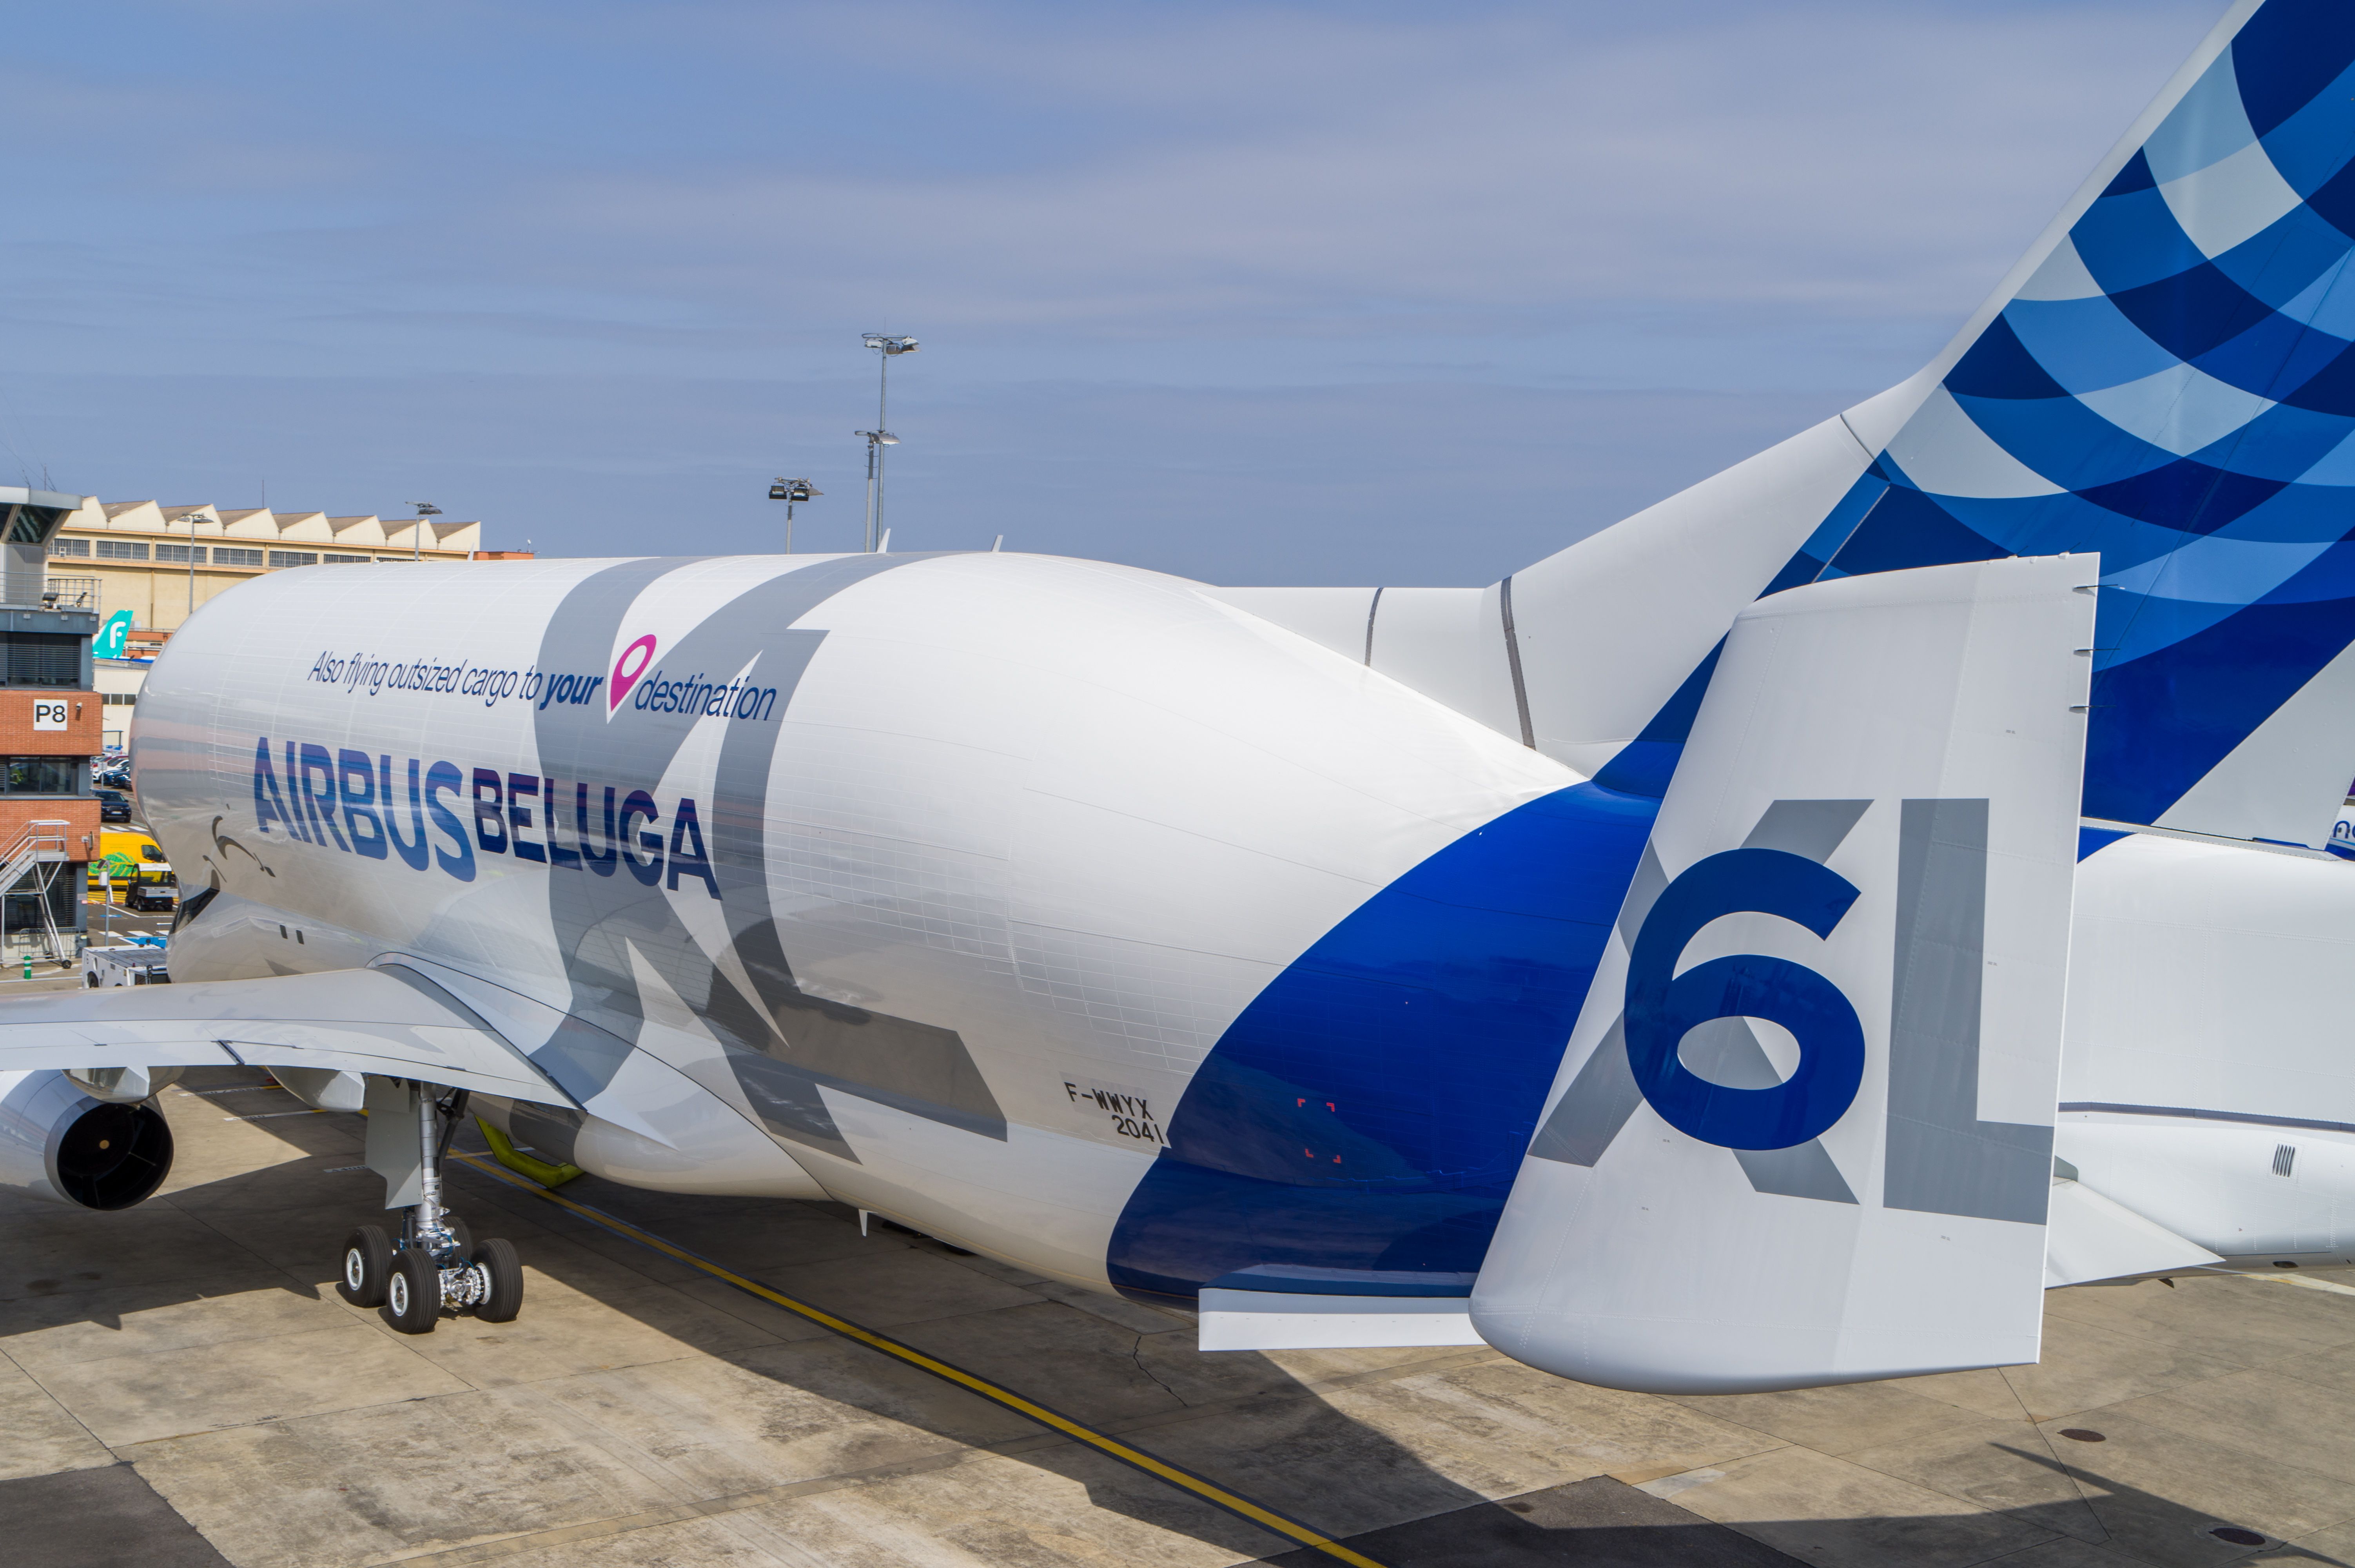 An Airbus BelugaXL parked at an airport.